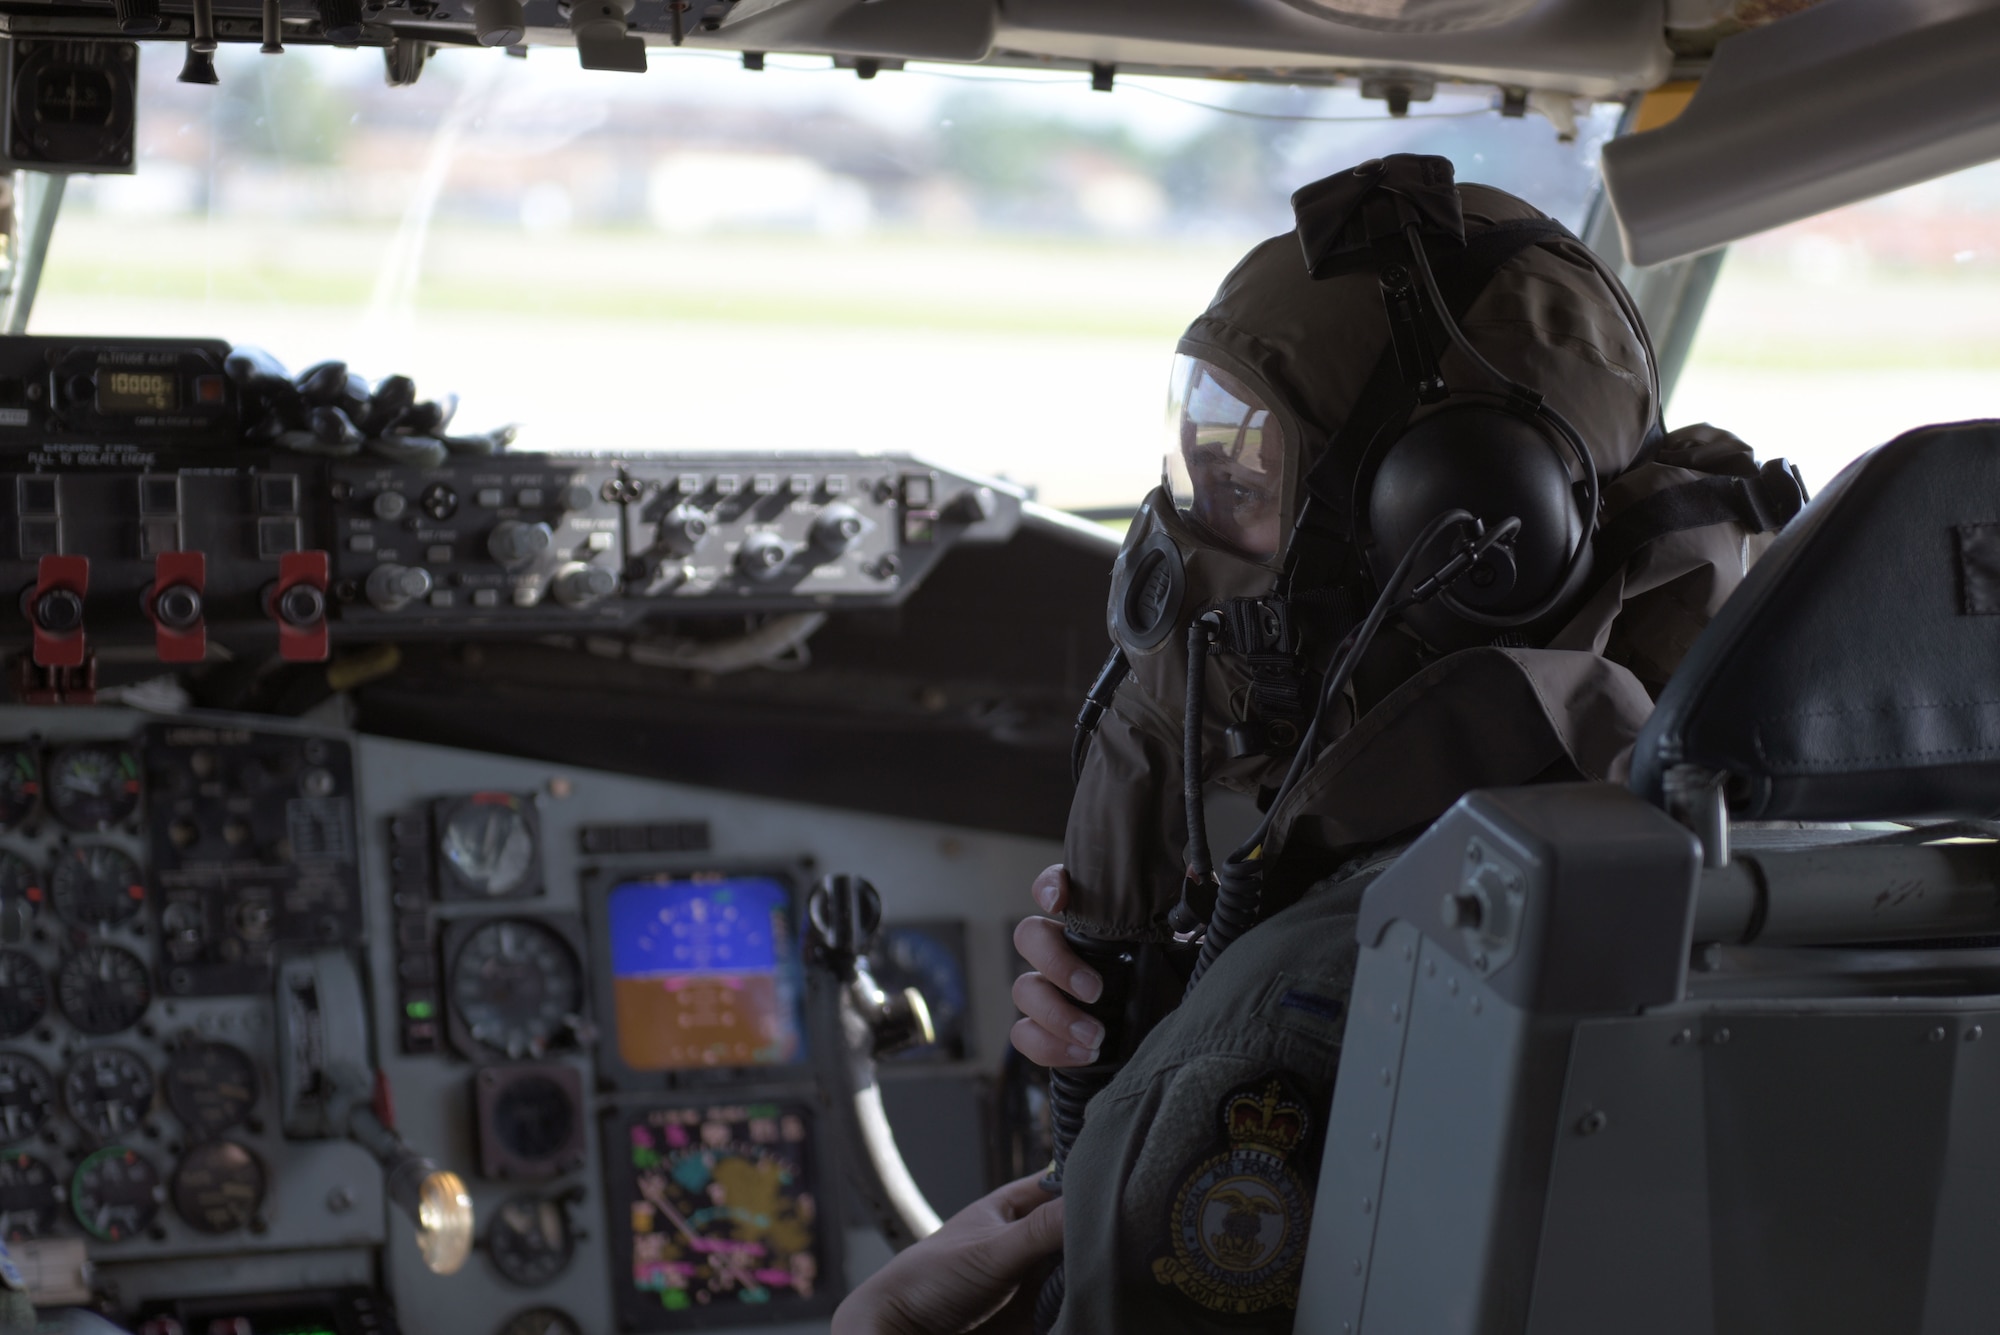 U.S. Air Force 1st Lt. Kelly Hightaian, 351st Air Refueling Squardron co-pilot, dons her gas mask before supporting Exercise Point Blank at RAF Mildenhall, England, June 27, 2019. Military training and exercises with allies and partners is vital to our operational readiness and capability to respond anytime, anywhere. (U.S. Air Force photo by Senior Airman Benjamin Cooper)